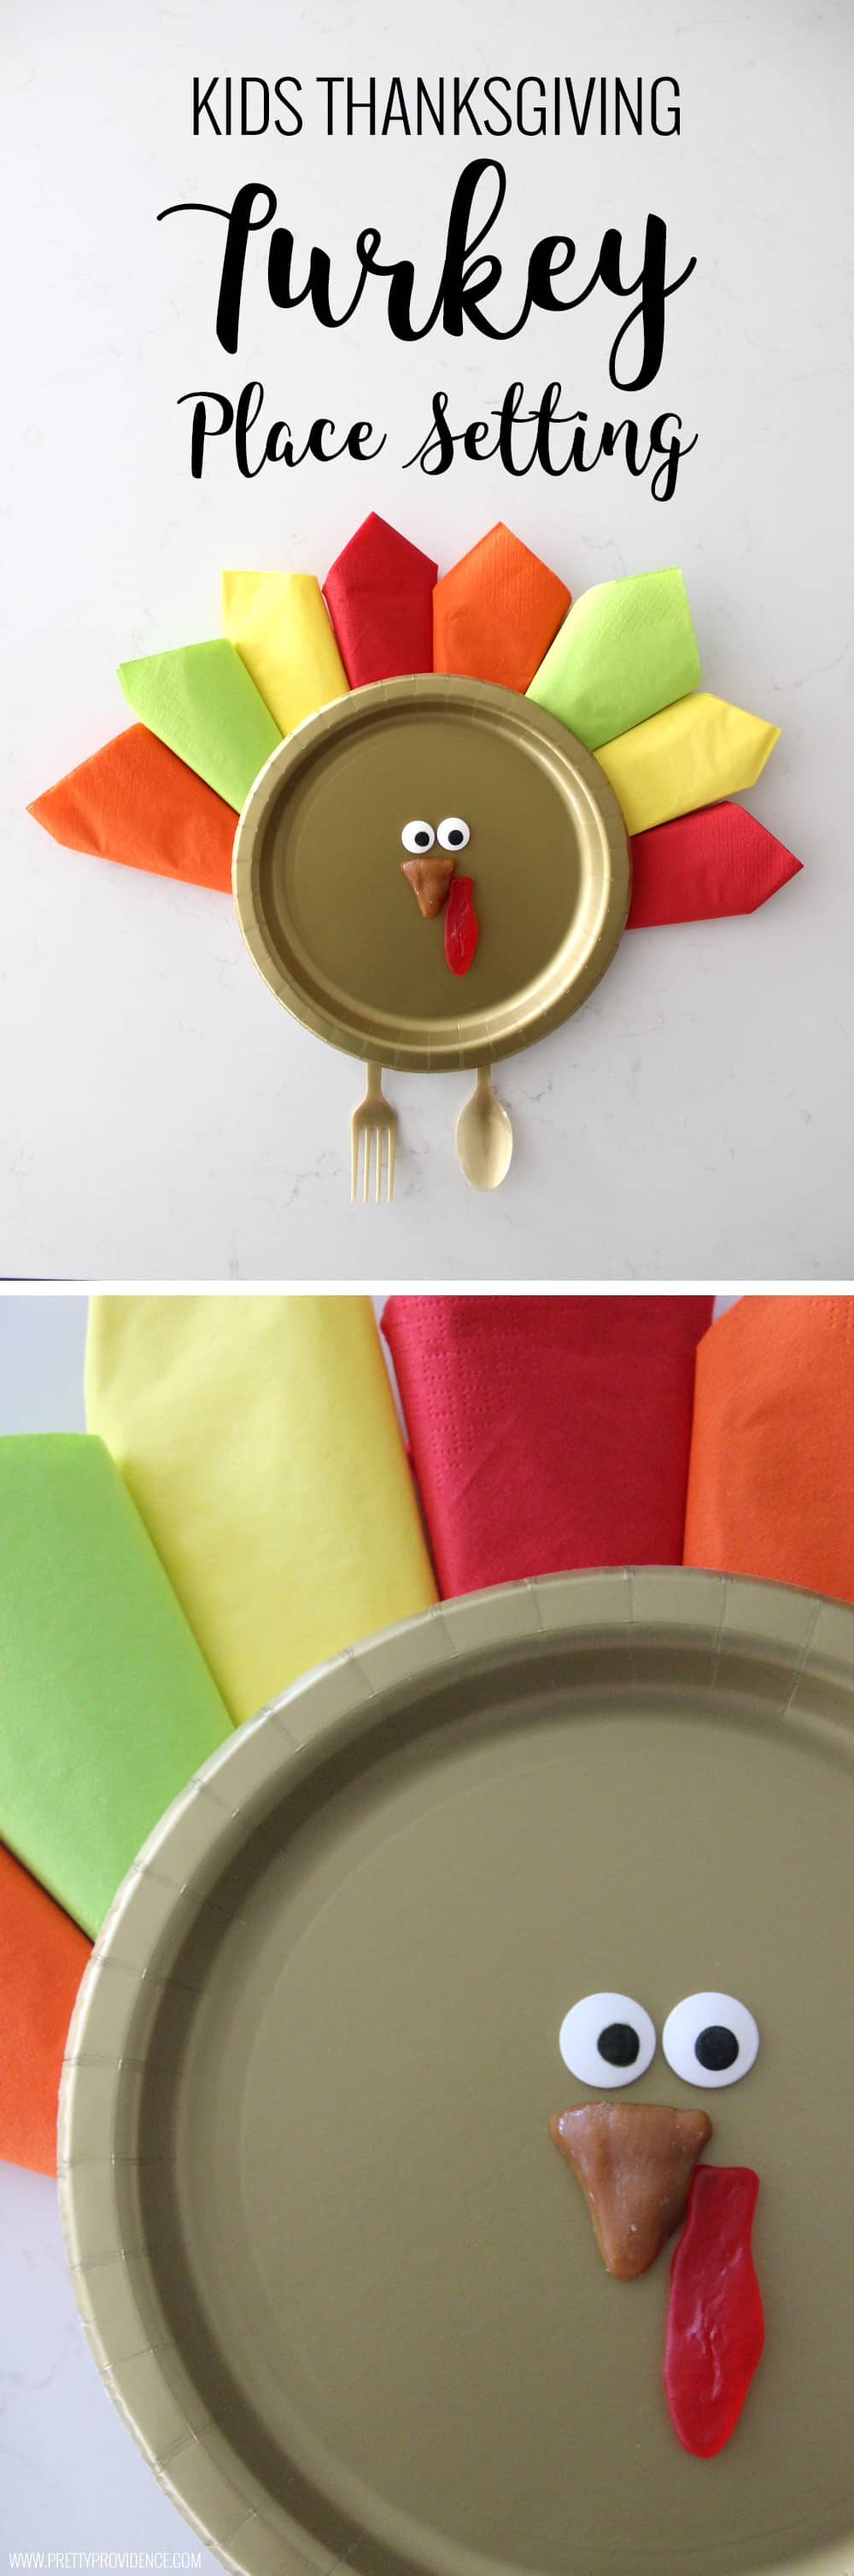 How cute is this kids Thanksgiving turkey place setting?! Such a fun and festive way to make the kids table special! 